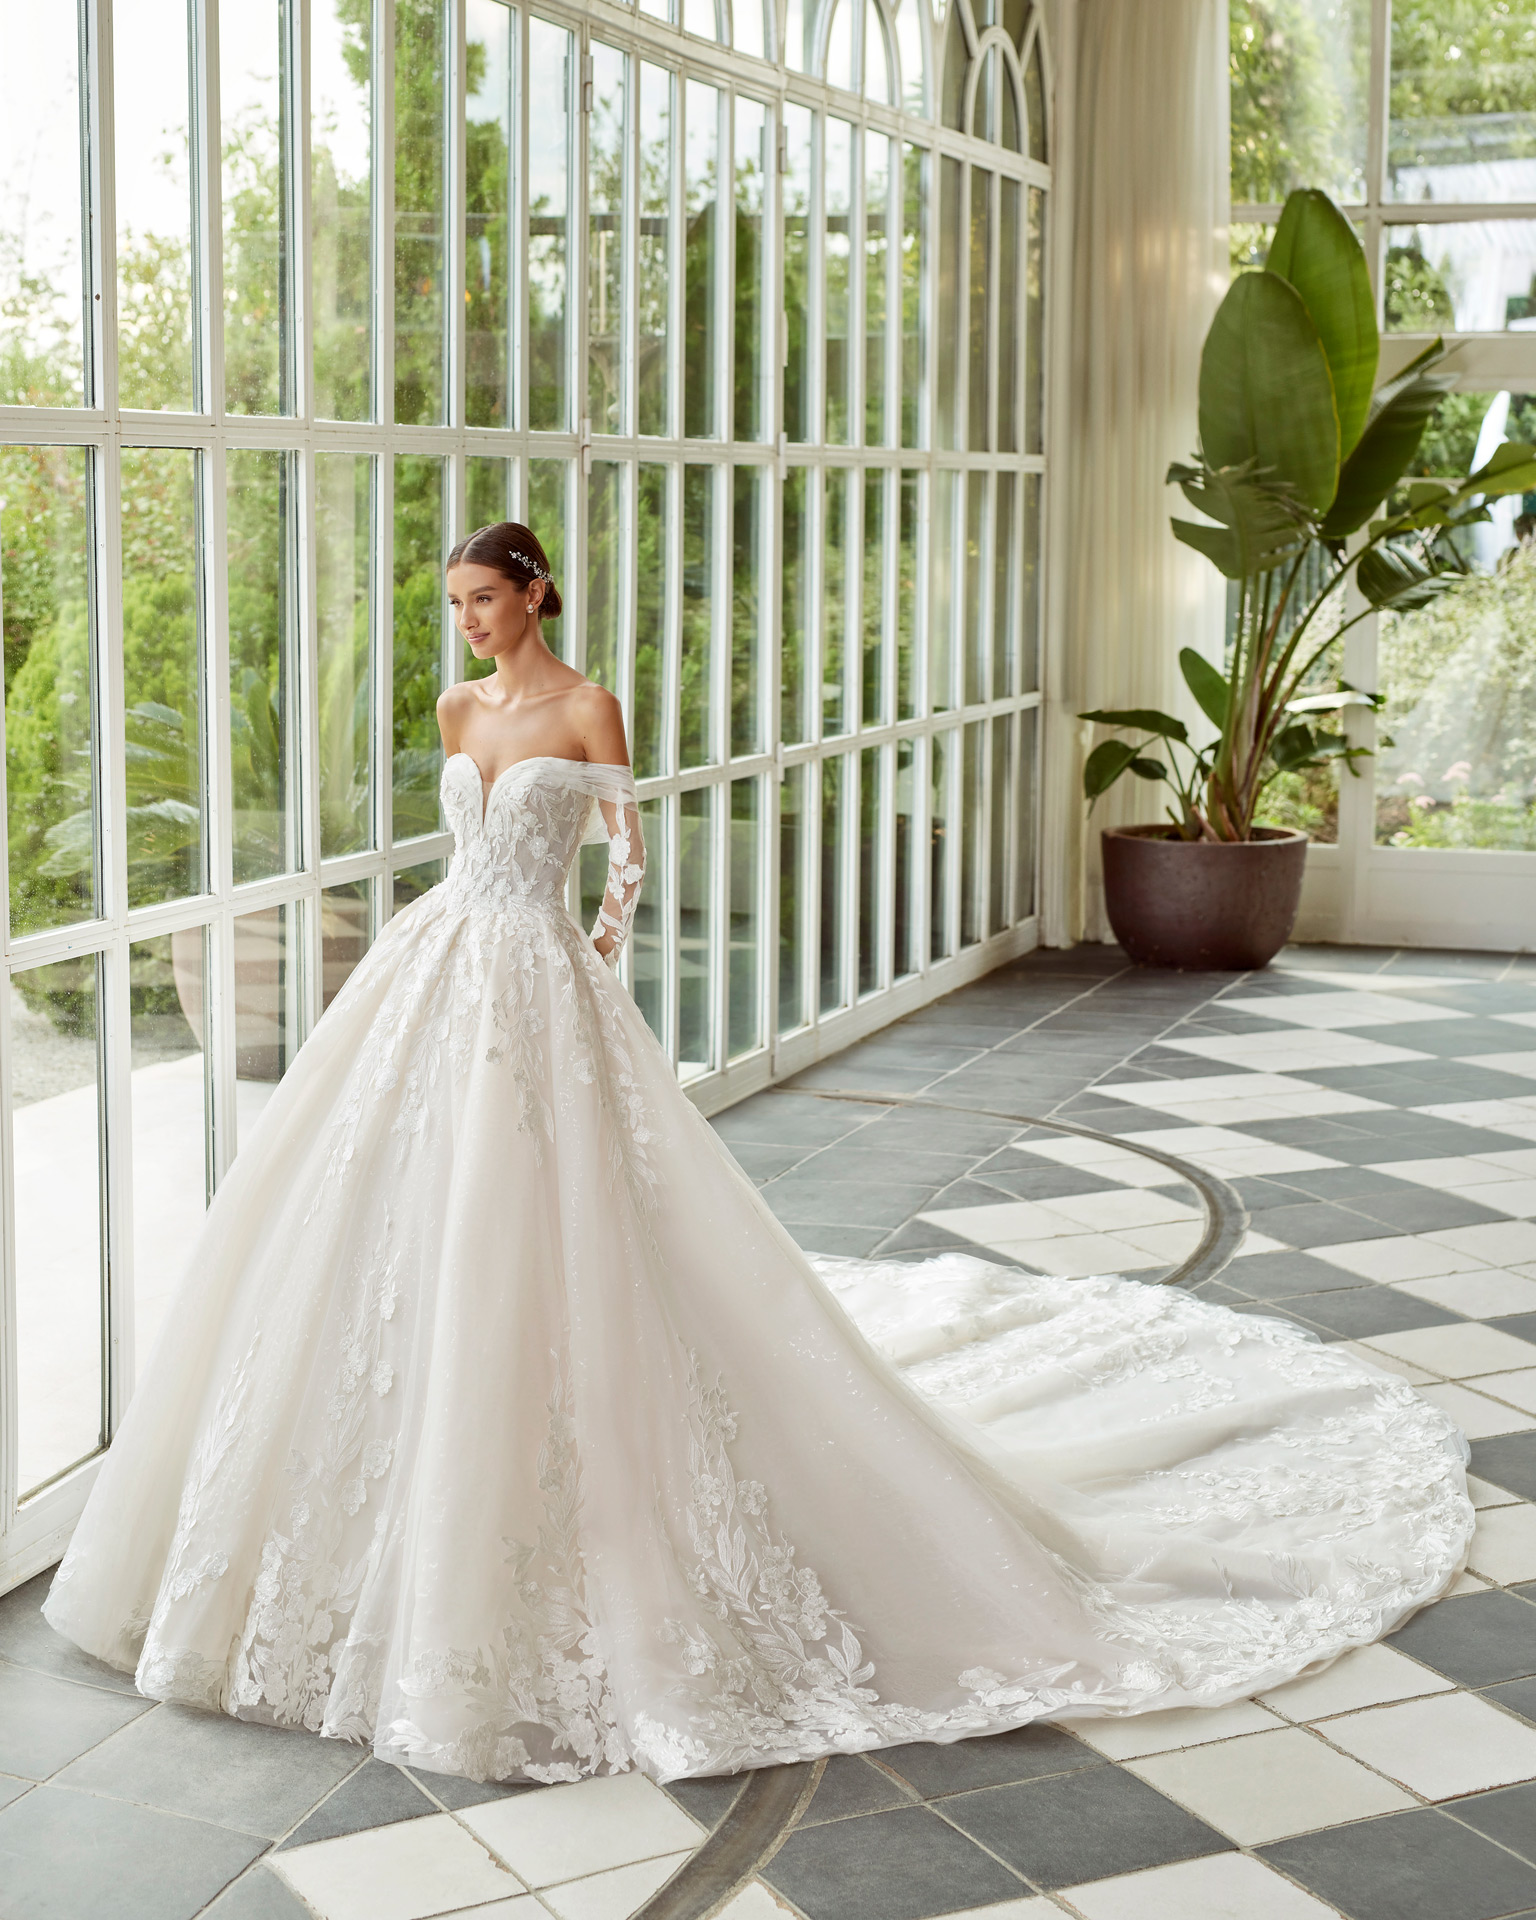 Princess-style wedding dress, with a full sheath-style skirt and shiny mesh; with a sweetheart neckline, a corset back, and long sleeves. Dreamy Luna Studio design made of tulle and lace, with beadwork finishes. LUNA_NOVIAS.